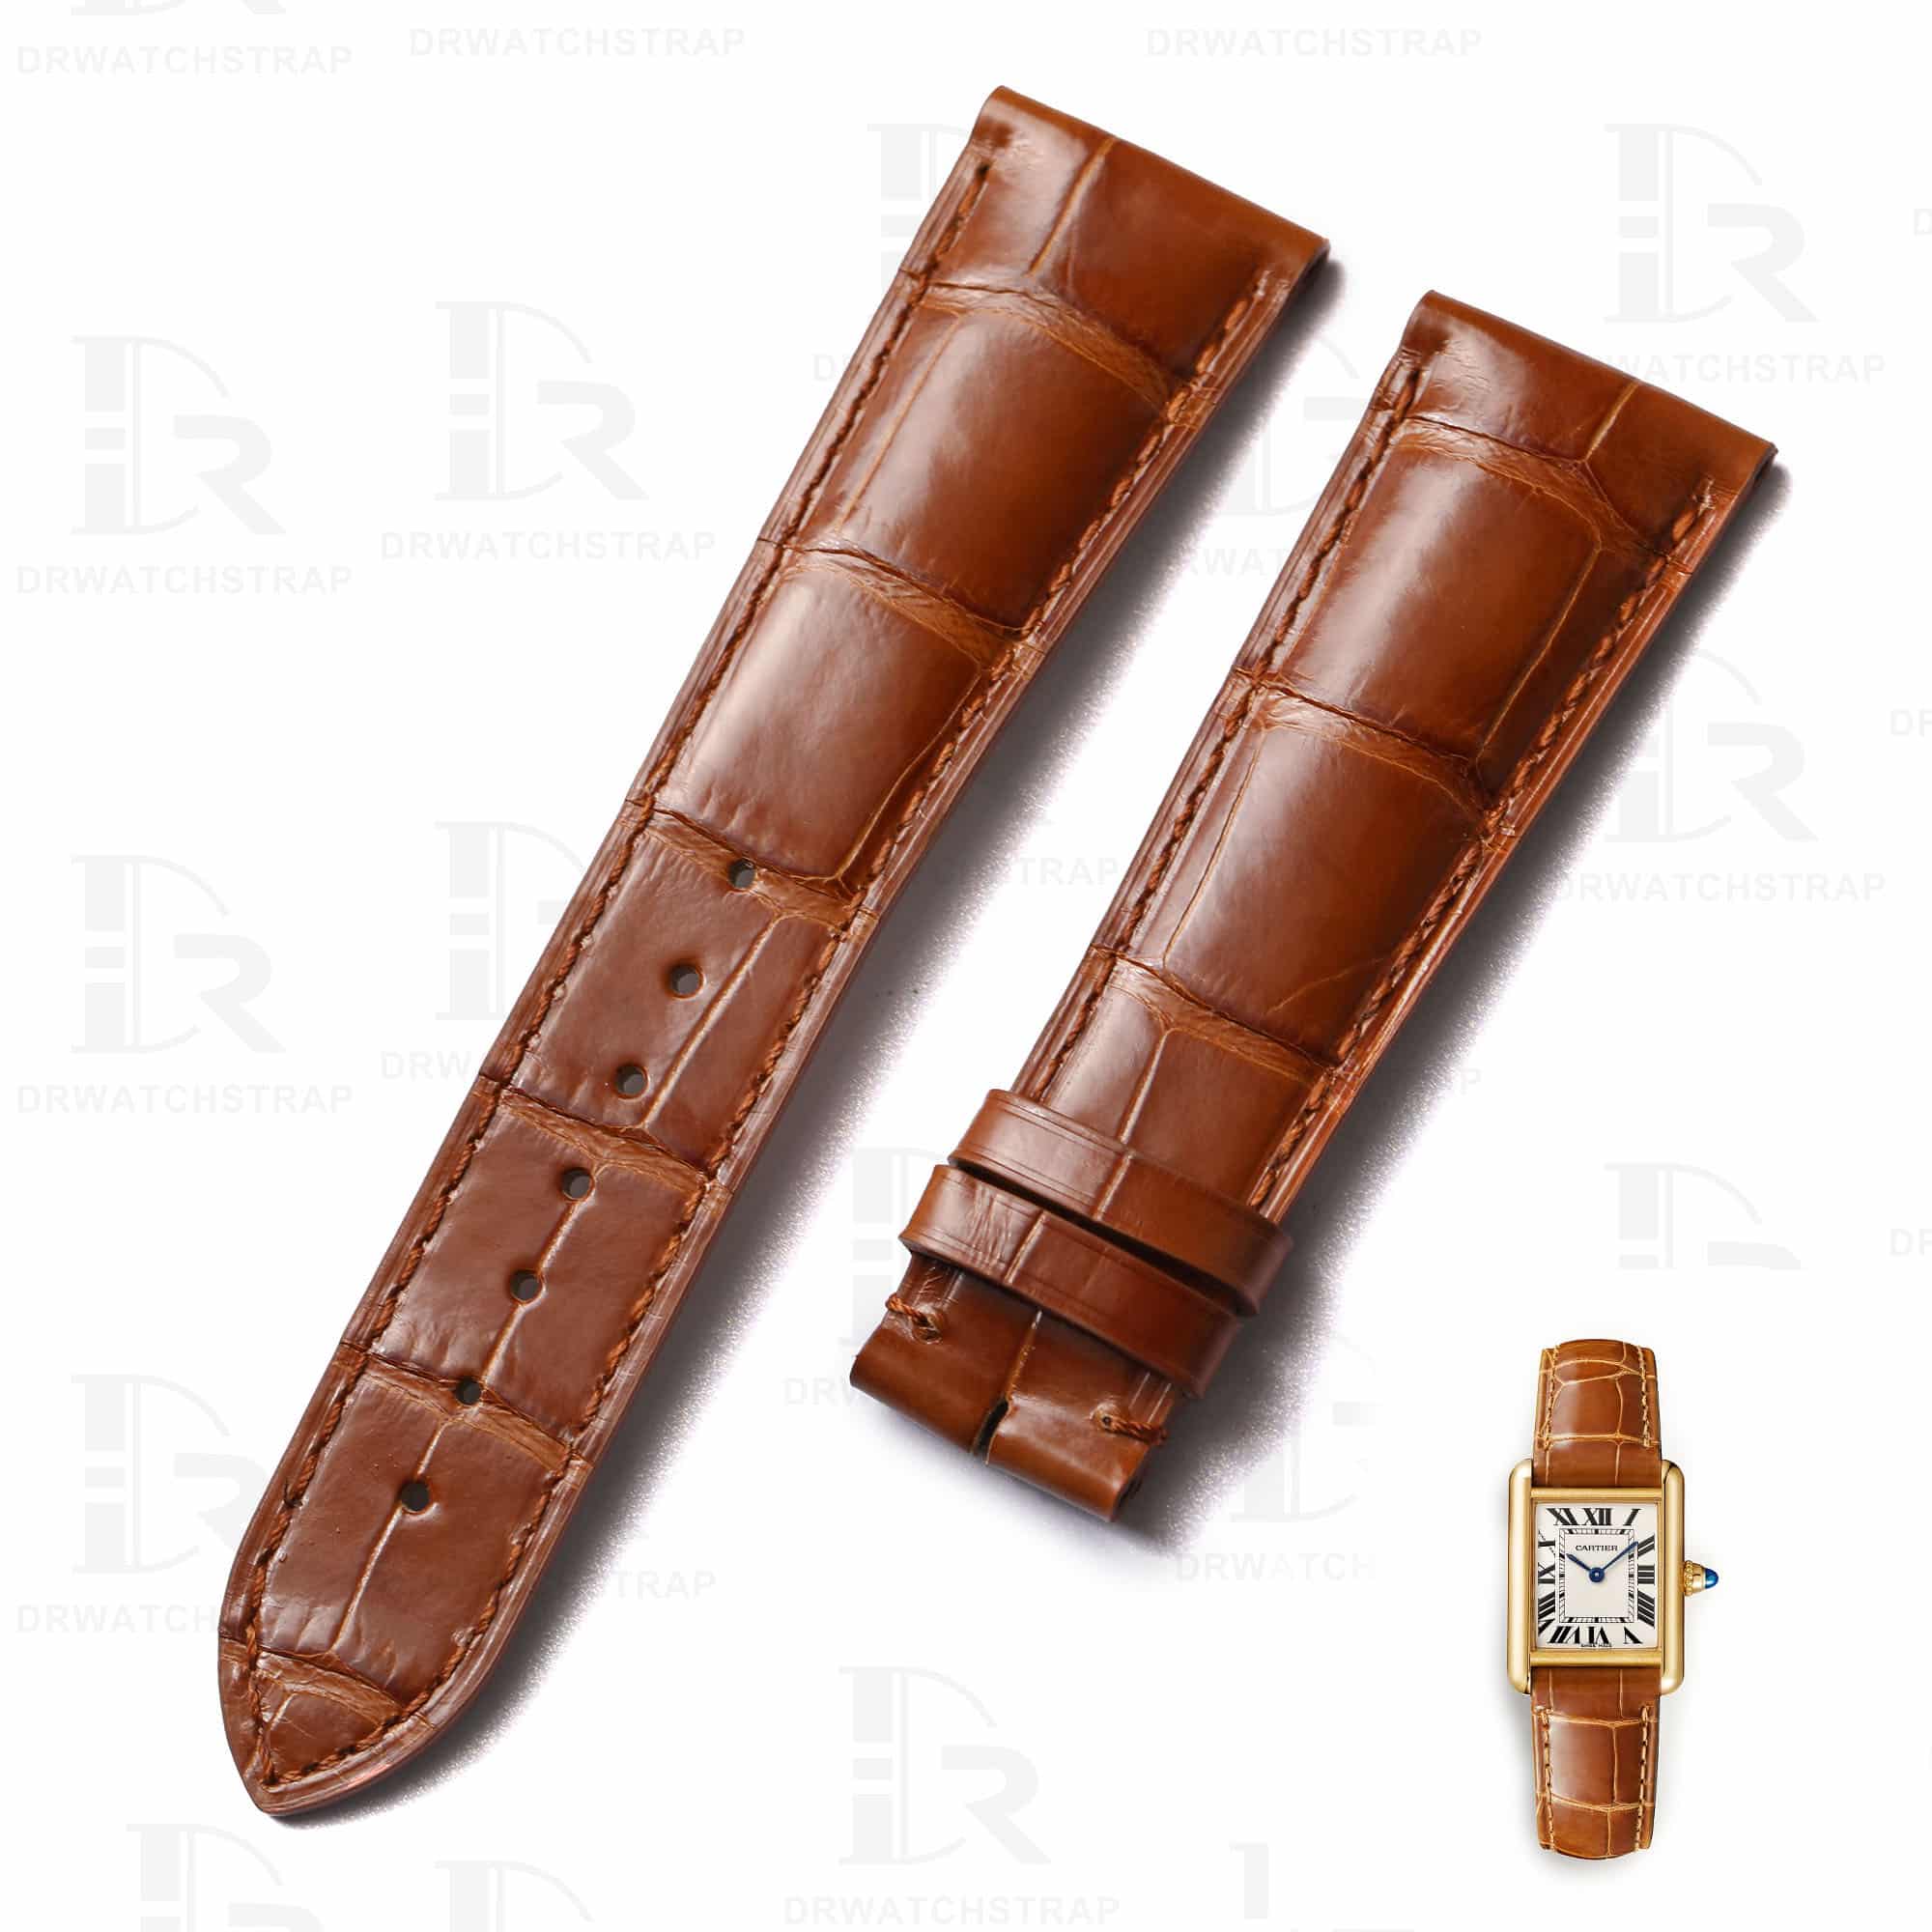 Premium best quality American Alligator OEM custom brown 23mm Cartier tank leather straps & watch bands for Cartier Tank & Ronde SOLO watches online from DR Watchstrap - Shop the genuine crocodile handmade leather watch strap and watch band online at a low price